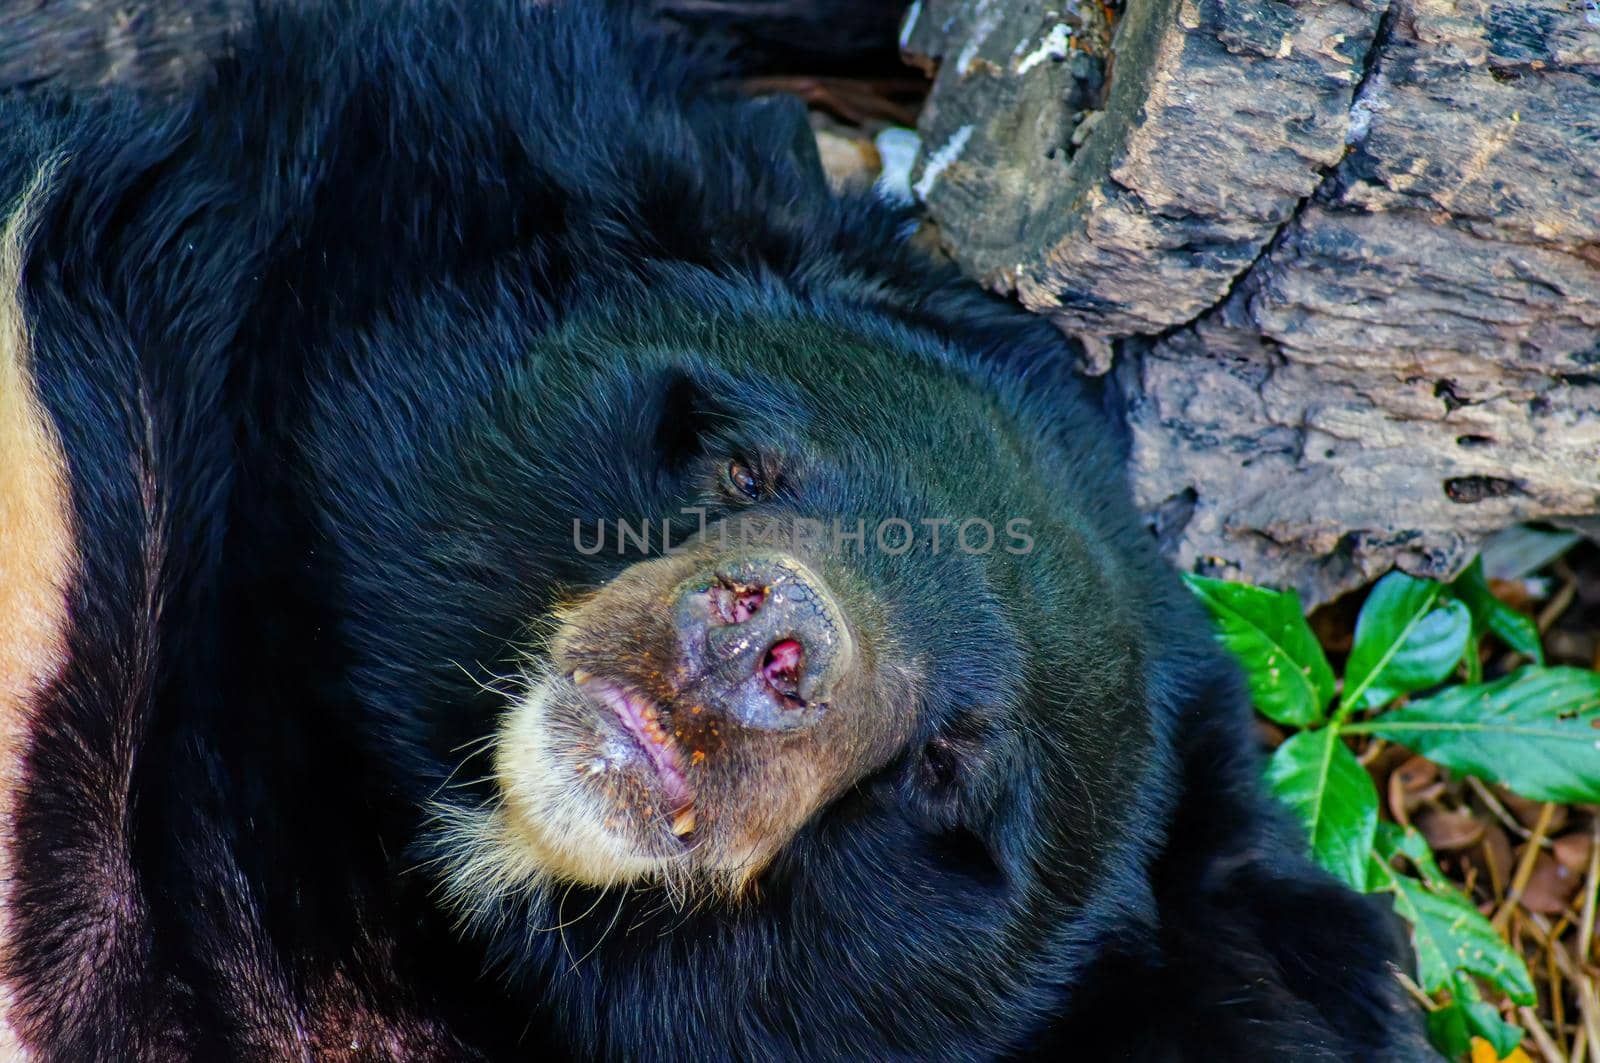 Asian black bear or Asiatic black bear or Selenarctos thibetanus is resting during the day near the timber.